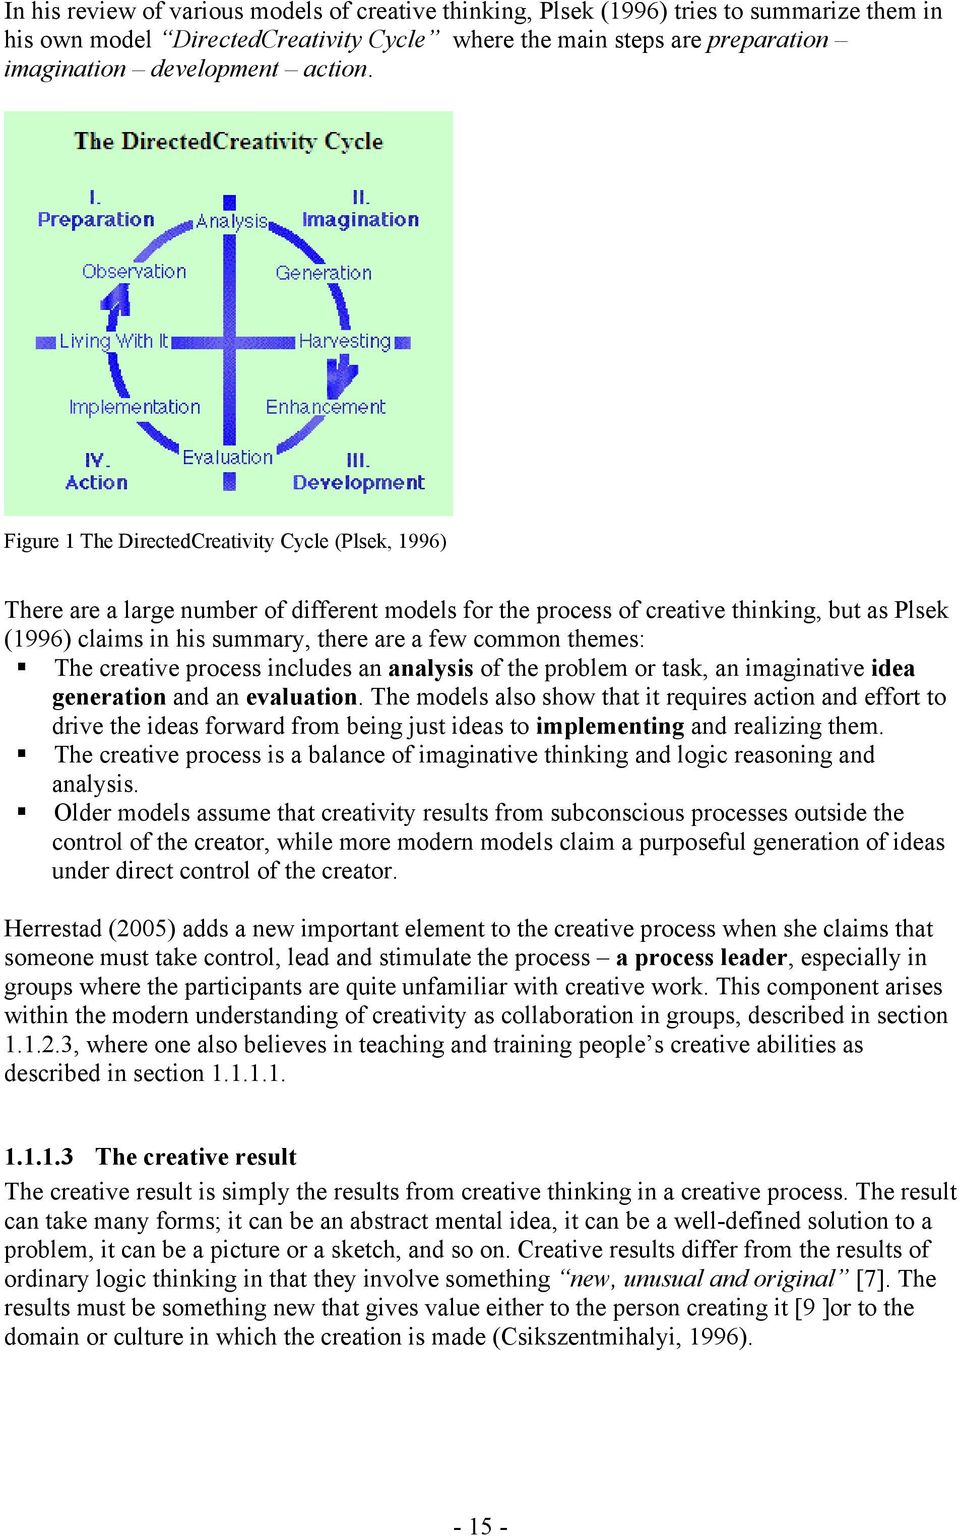 Figure 1 The DirectedCreativity Cycle (Plsek, 1996) There are a large number of different models for the process of creative thinking, but as Plsek (1996) claims in his summary, there are a few